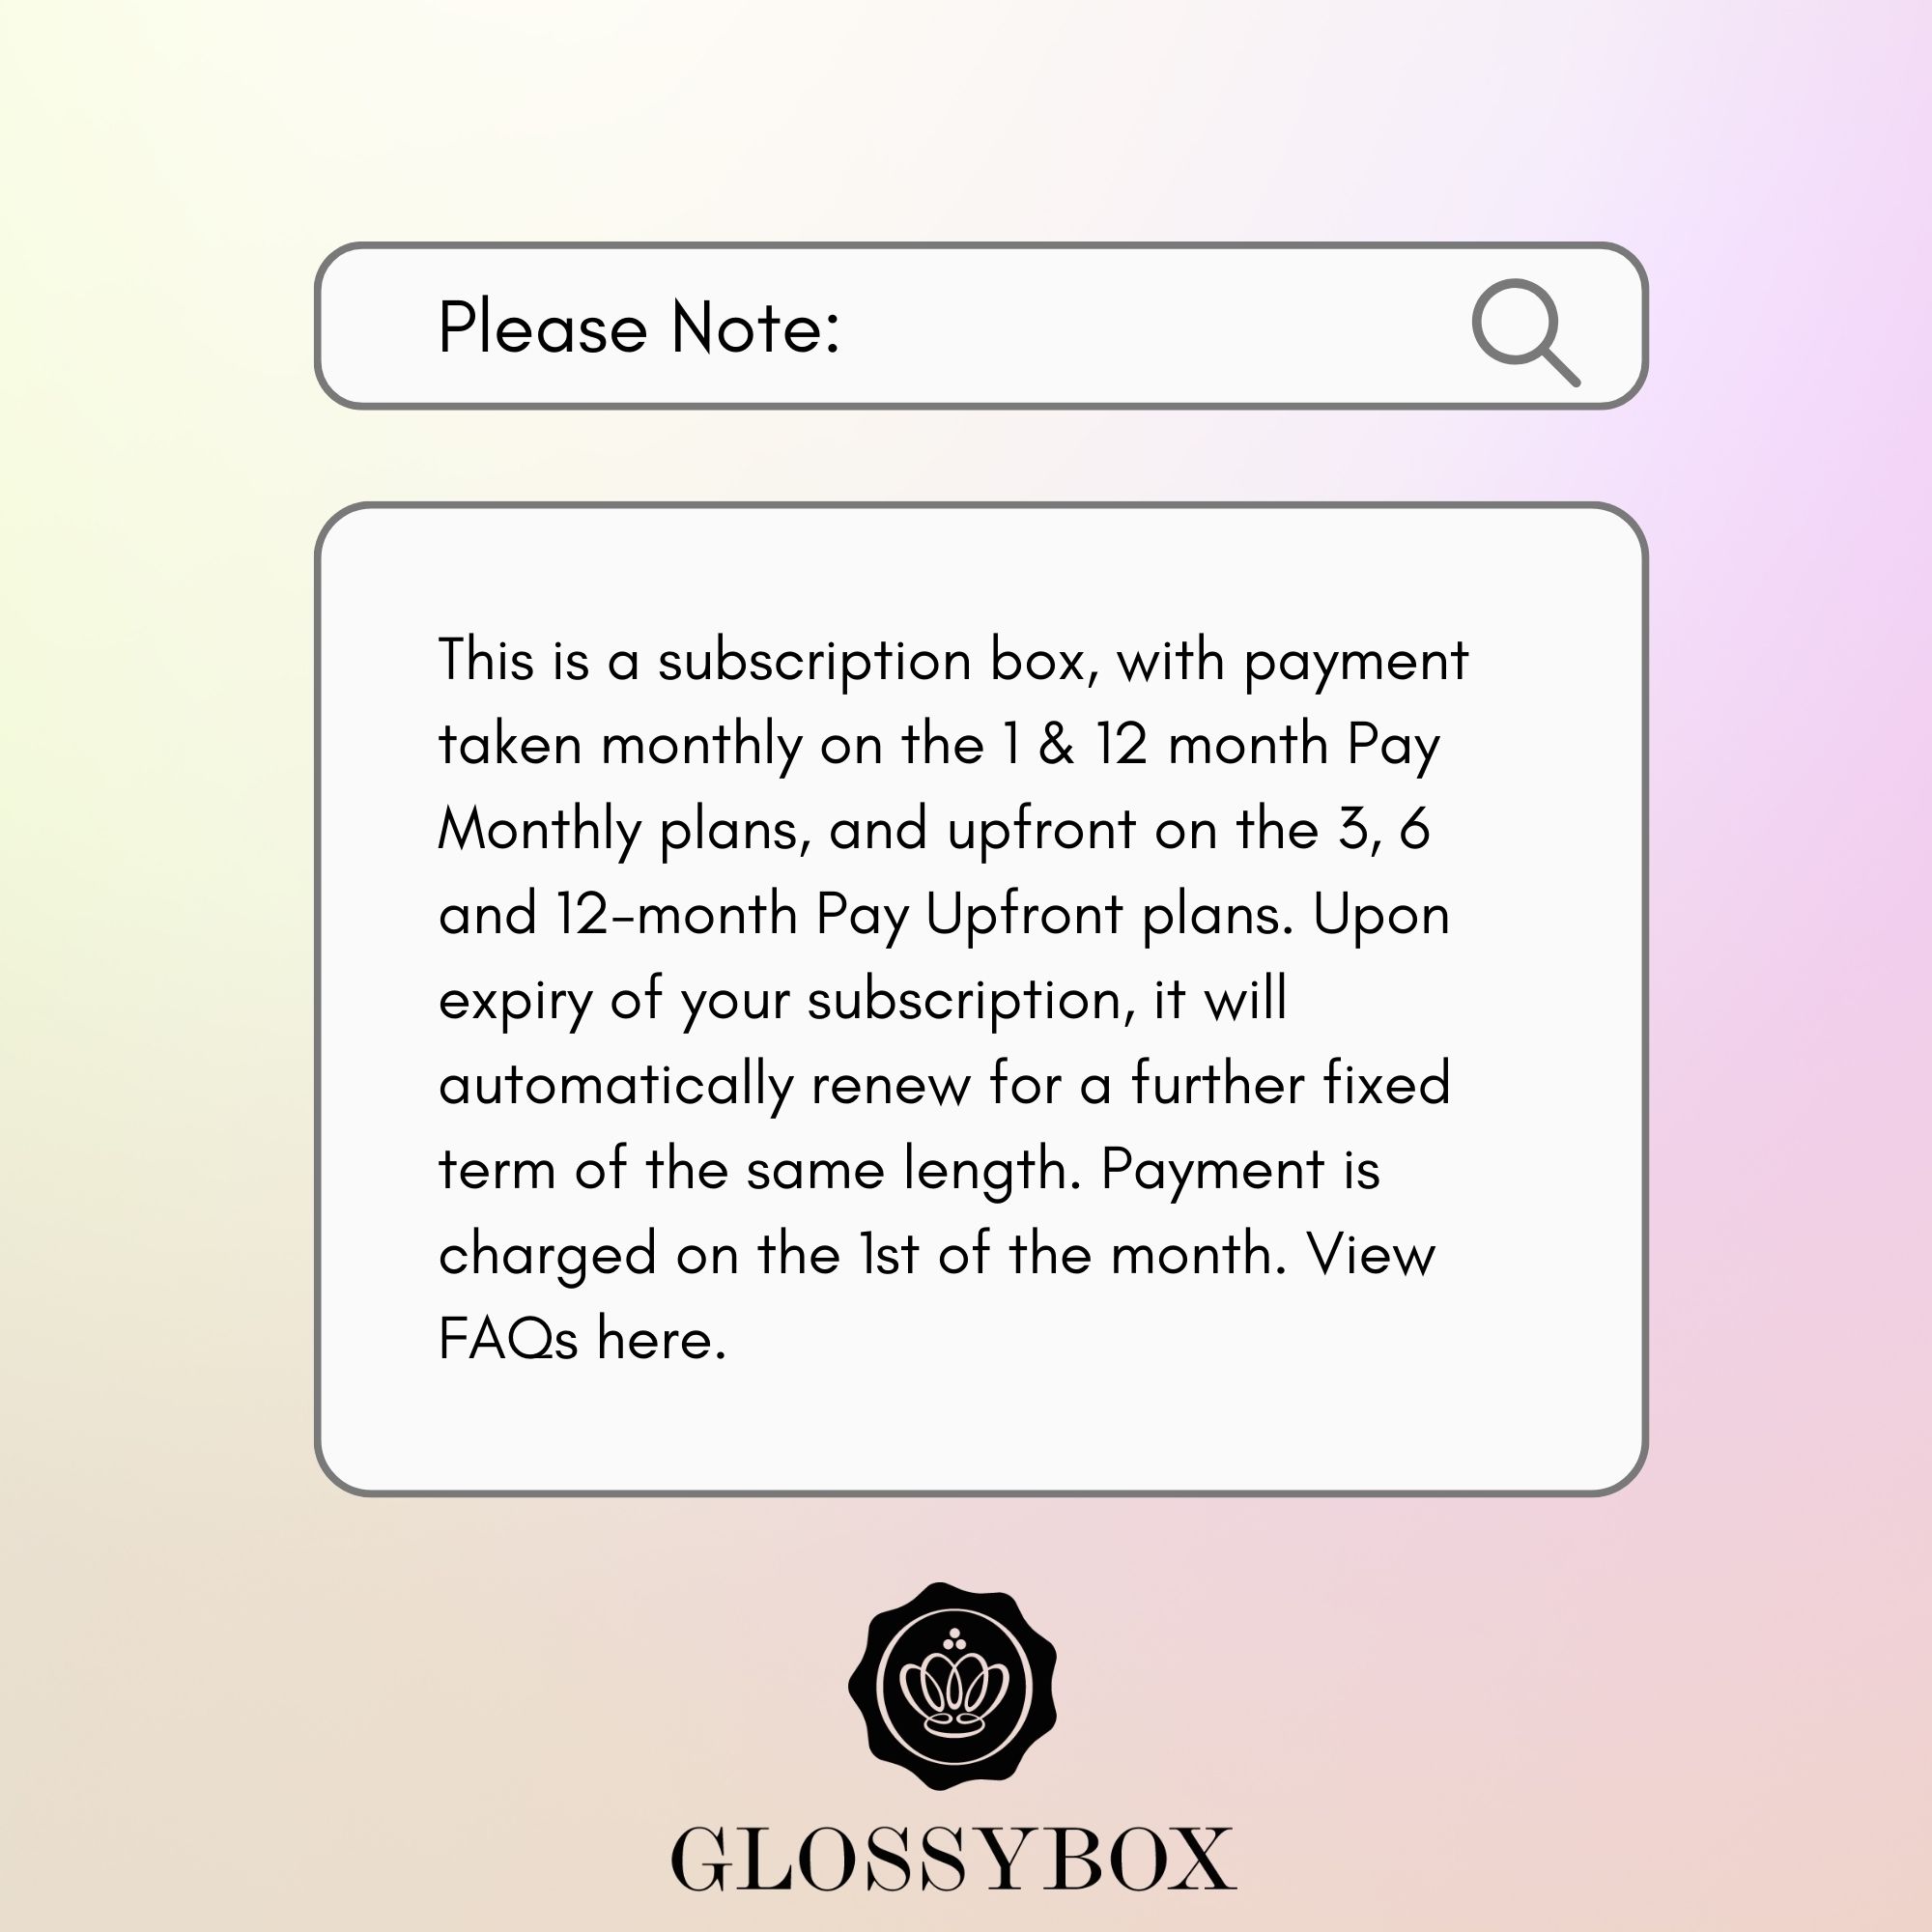 Please Note: This is a subscription box, with payment taken monthly on the 1 & 12 month Pay Monthly plans, and upfront on the 3, 6 and 12-month Pay Upfront plans. Upon expiry of your subscription, it will automatically renew for a further fixed term of the same length. Payment is charged on the 1st of the month. View FAQs here.